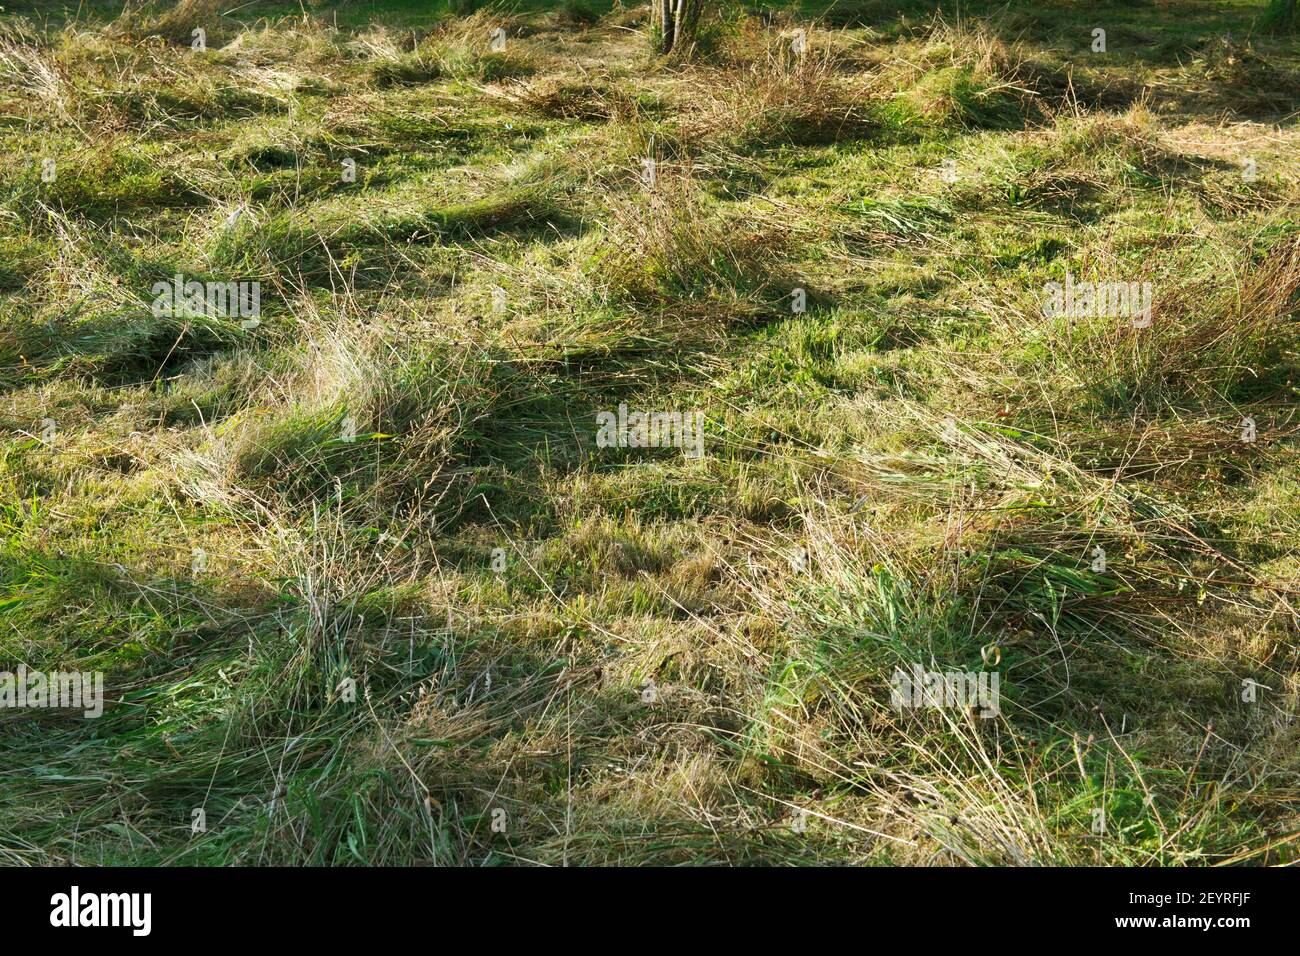 Wildflower meadow strimmed in August after flowering. The cut hay is left to dry to allow flower seeds to dry and fall out in situ. Stock Photo